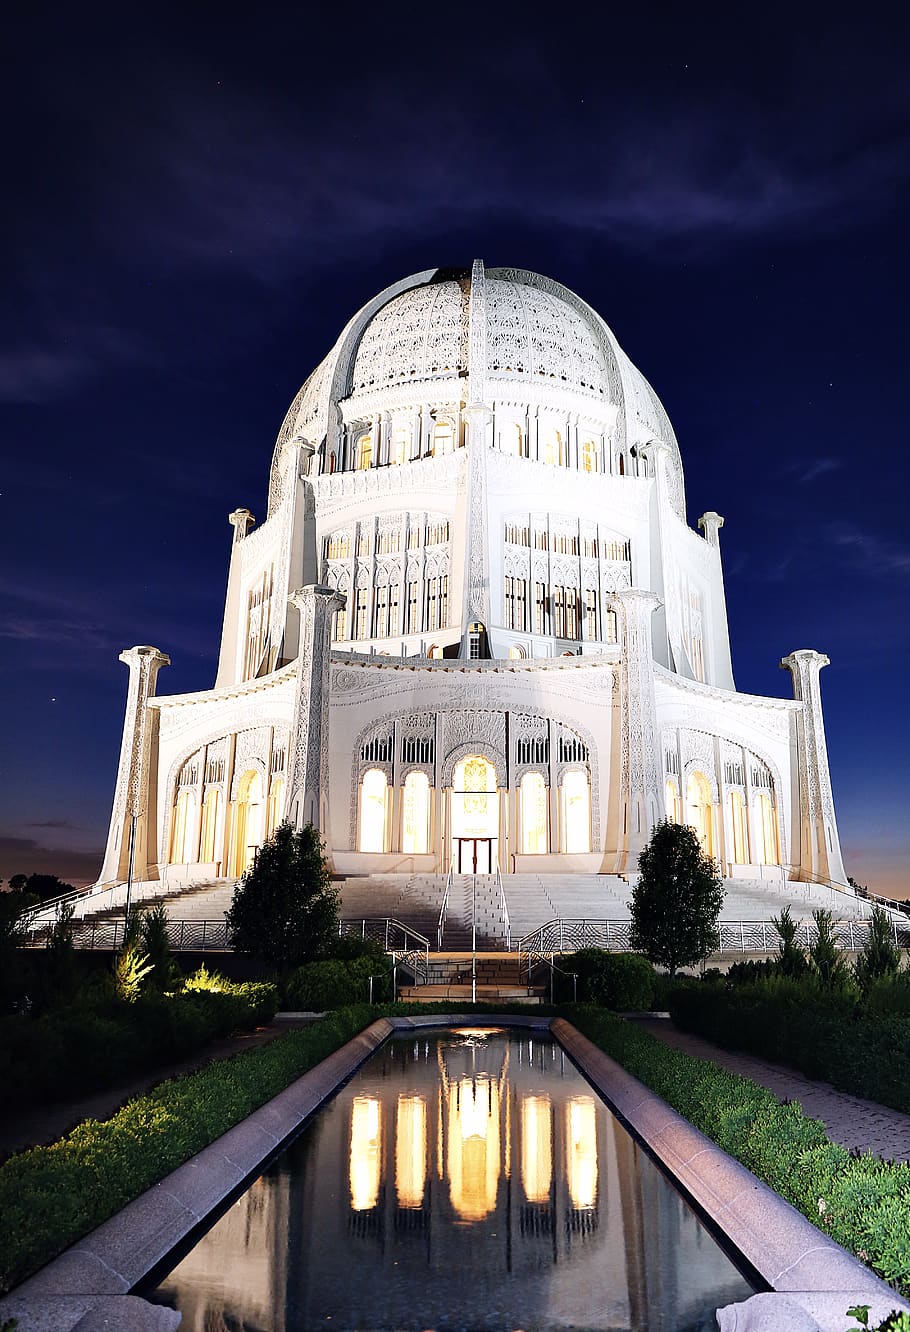 united states, wilmette, baha'i house of worship, architecture